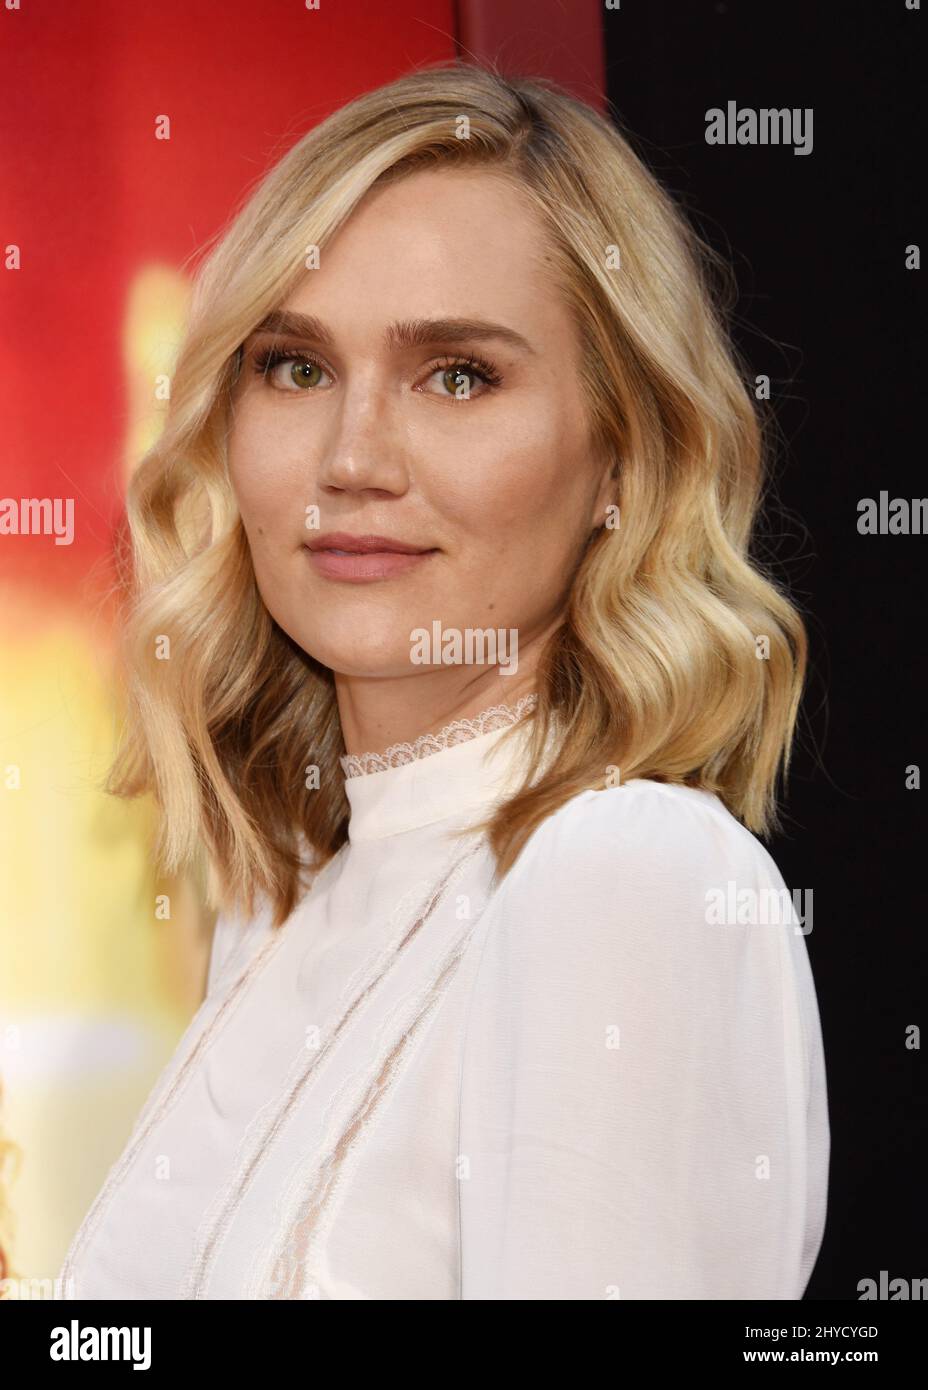 Nora Kirkpatrick attending The House Premiere in Los Angeles held at the TCL Chinese Theatre Stock Photo